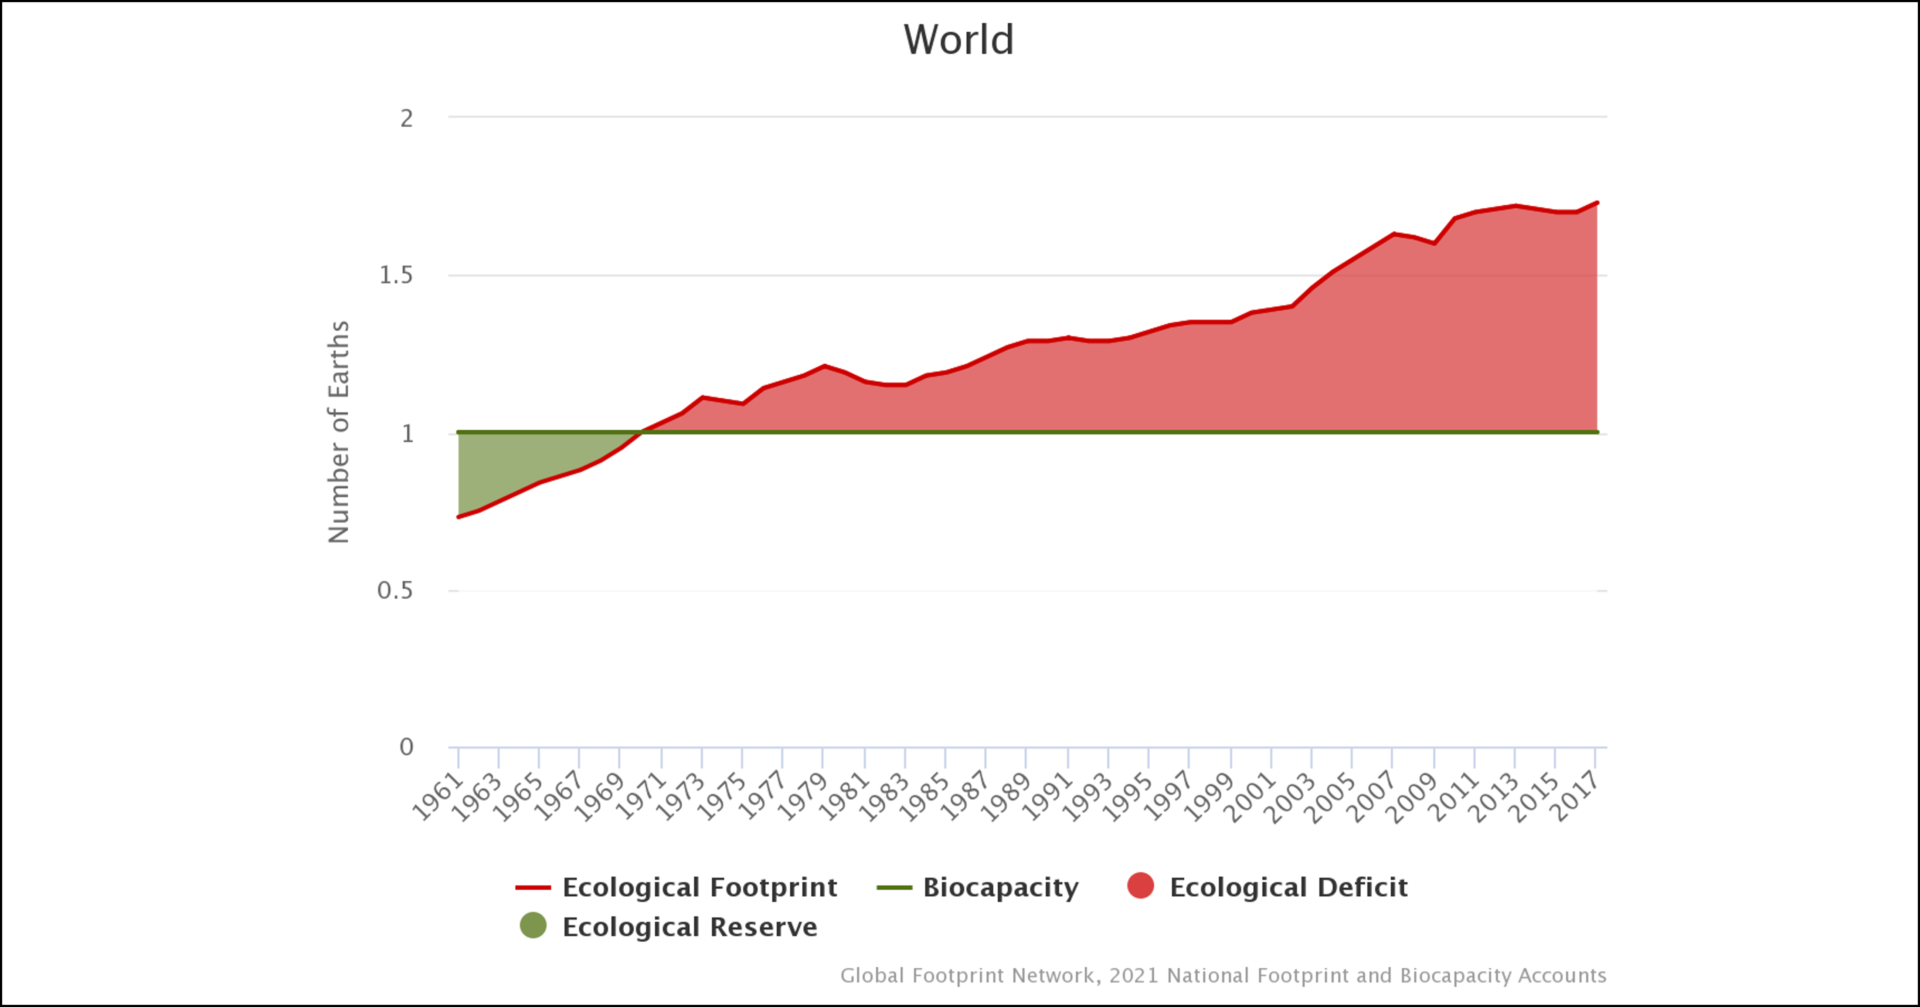 line chart of ecological footprint and biocapacity 1961-2017